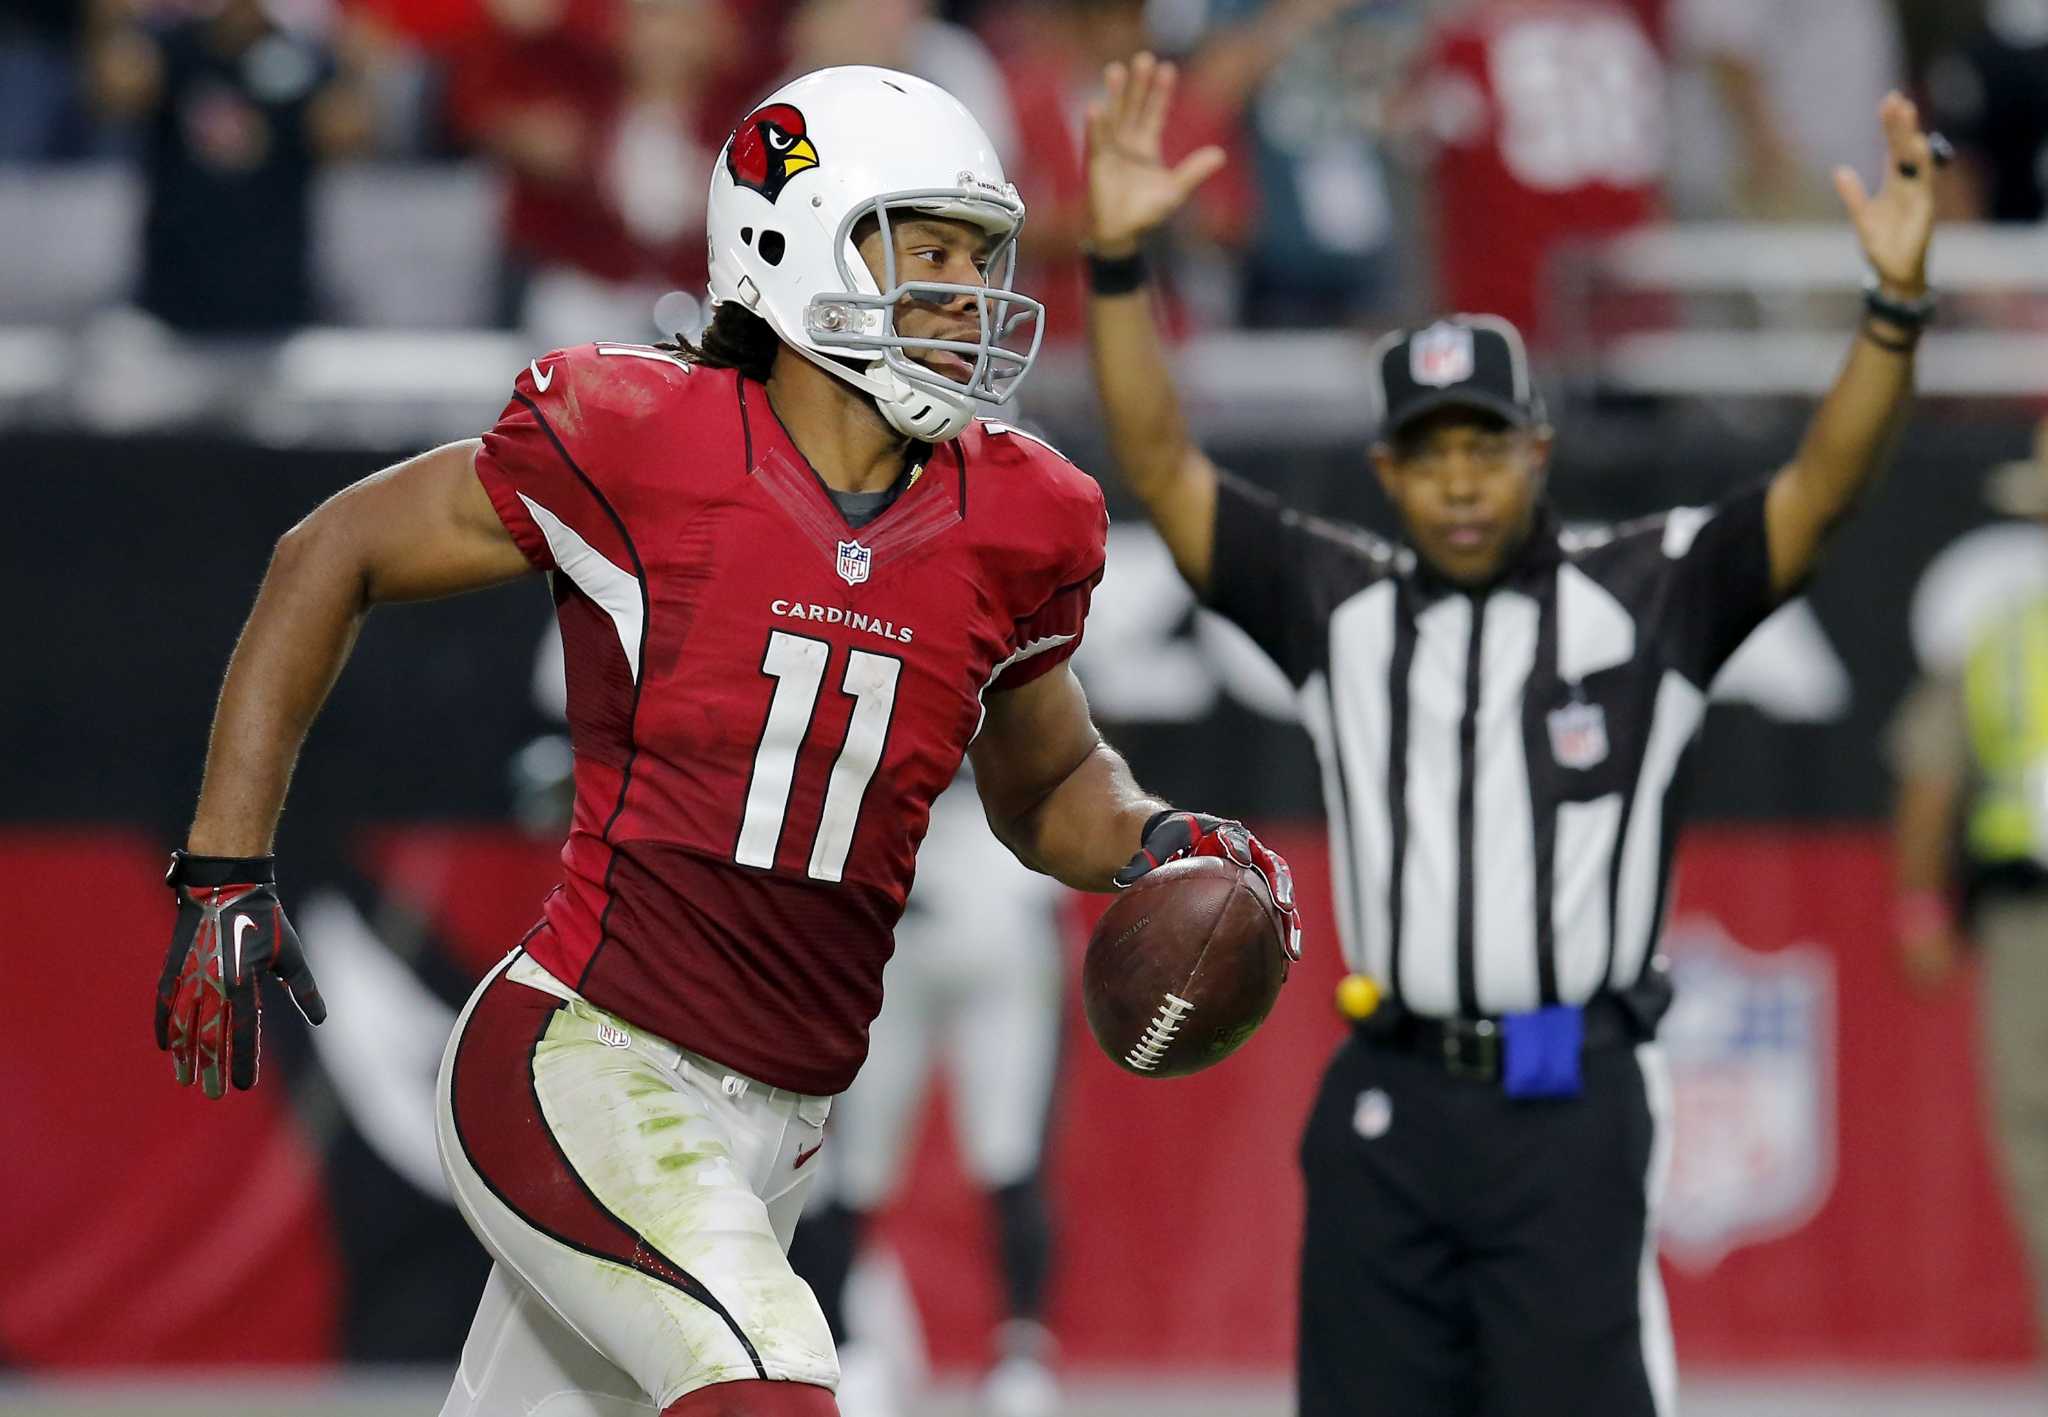 Larry Fitzgerald stays with Arizona under 2-year deal.